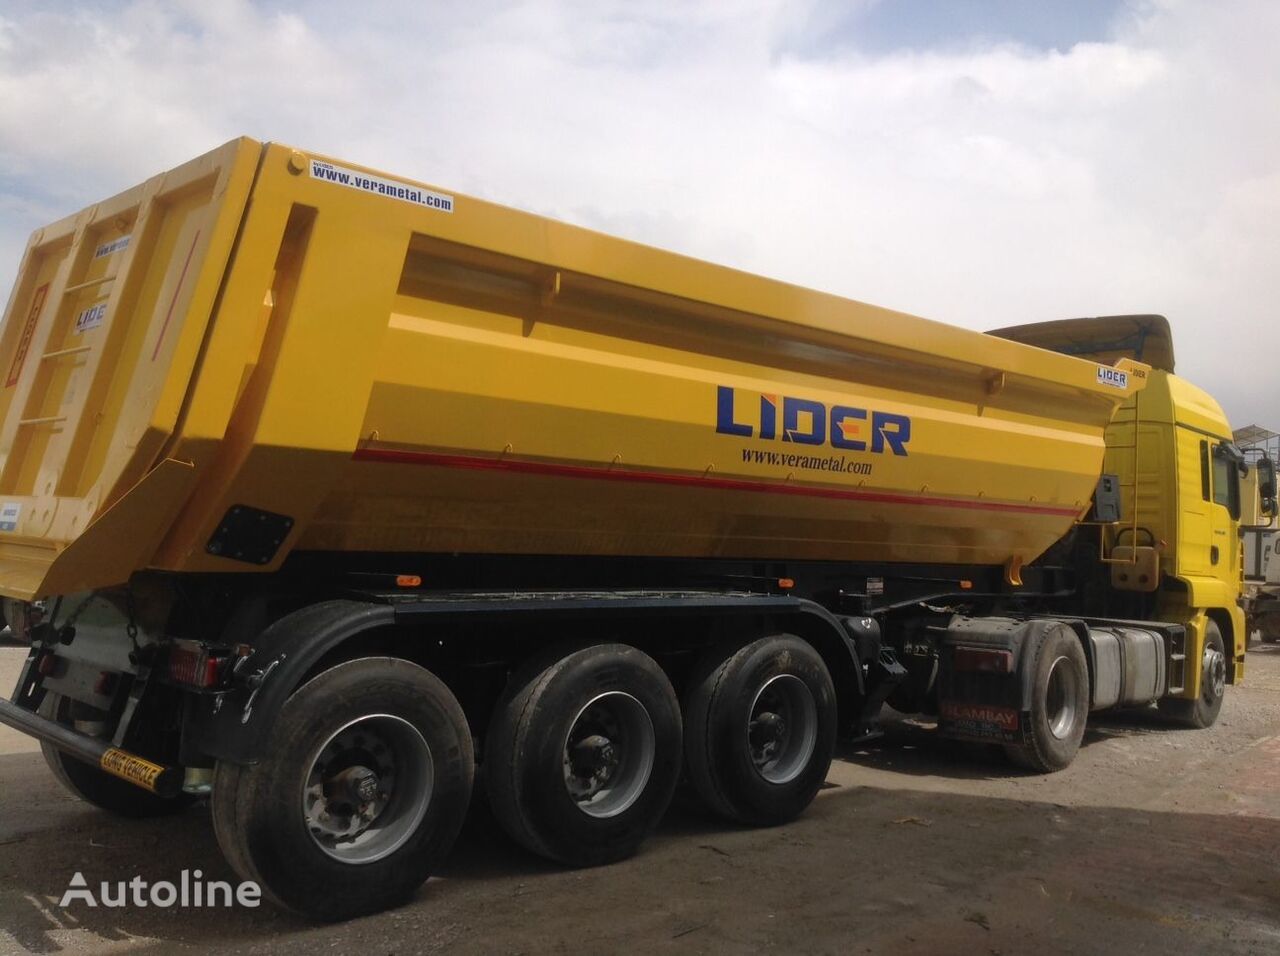 Lease a LIDER 2022 NEW READY IN STOCKS DIRECTLY FROM MANUFACTURER COMPANY LIDER 2022 NEW READY IN STOCKS DIRECTLY FROM MANUFACTURER COMPANY: picture 12